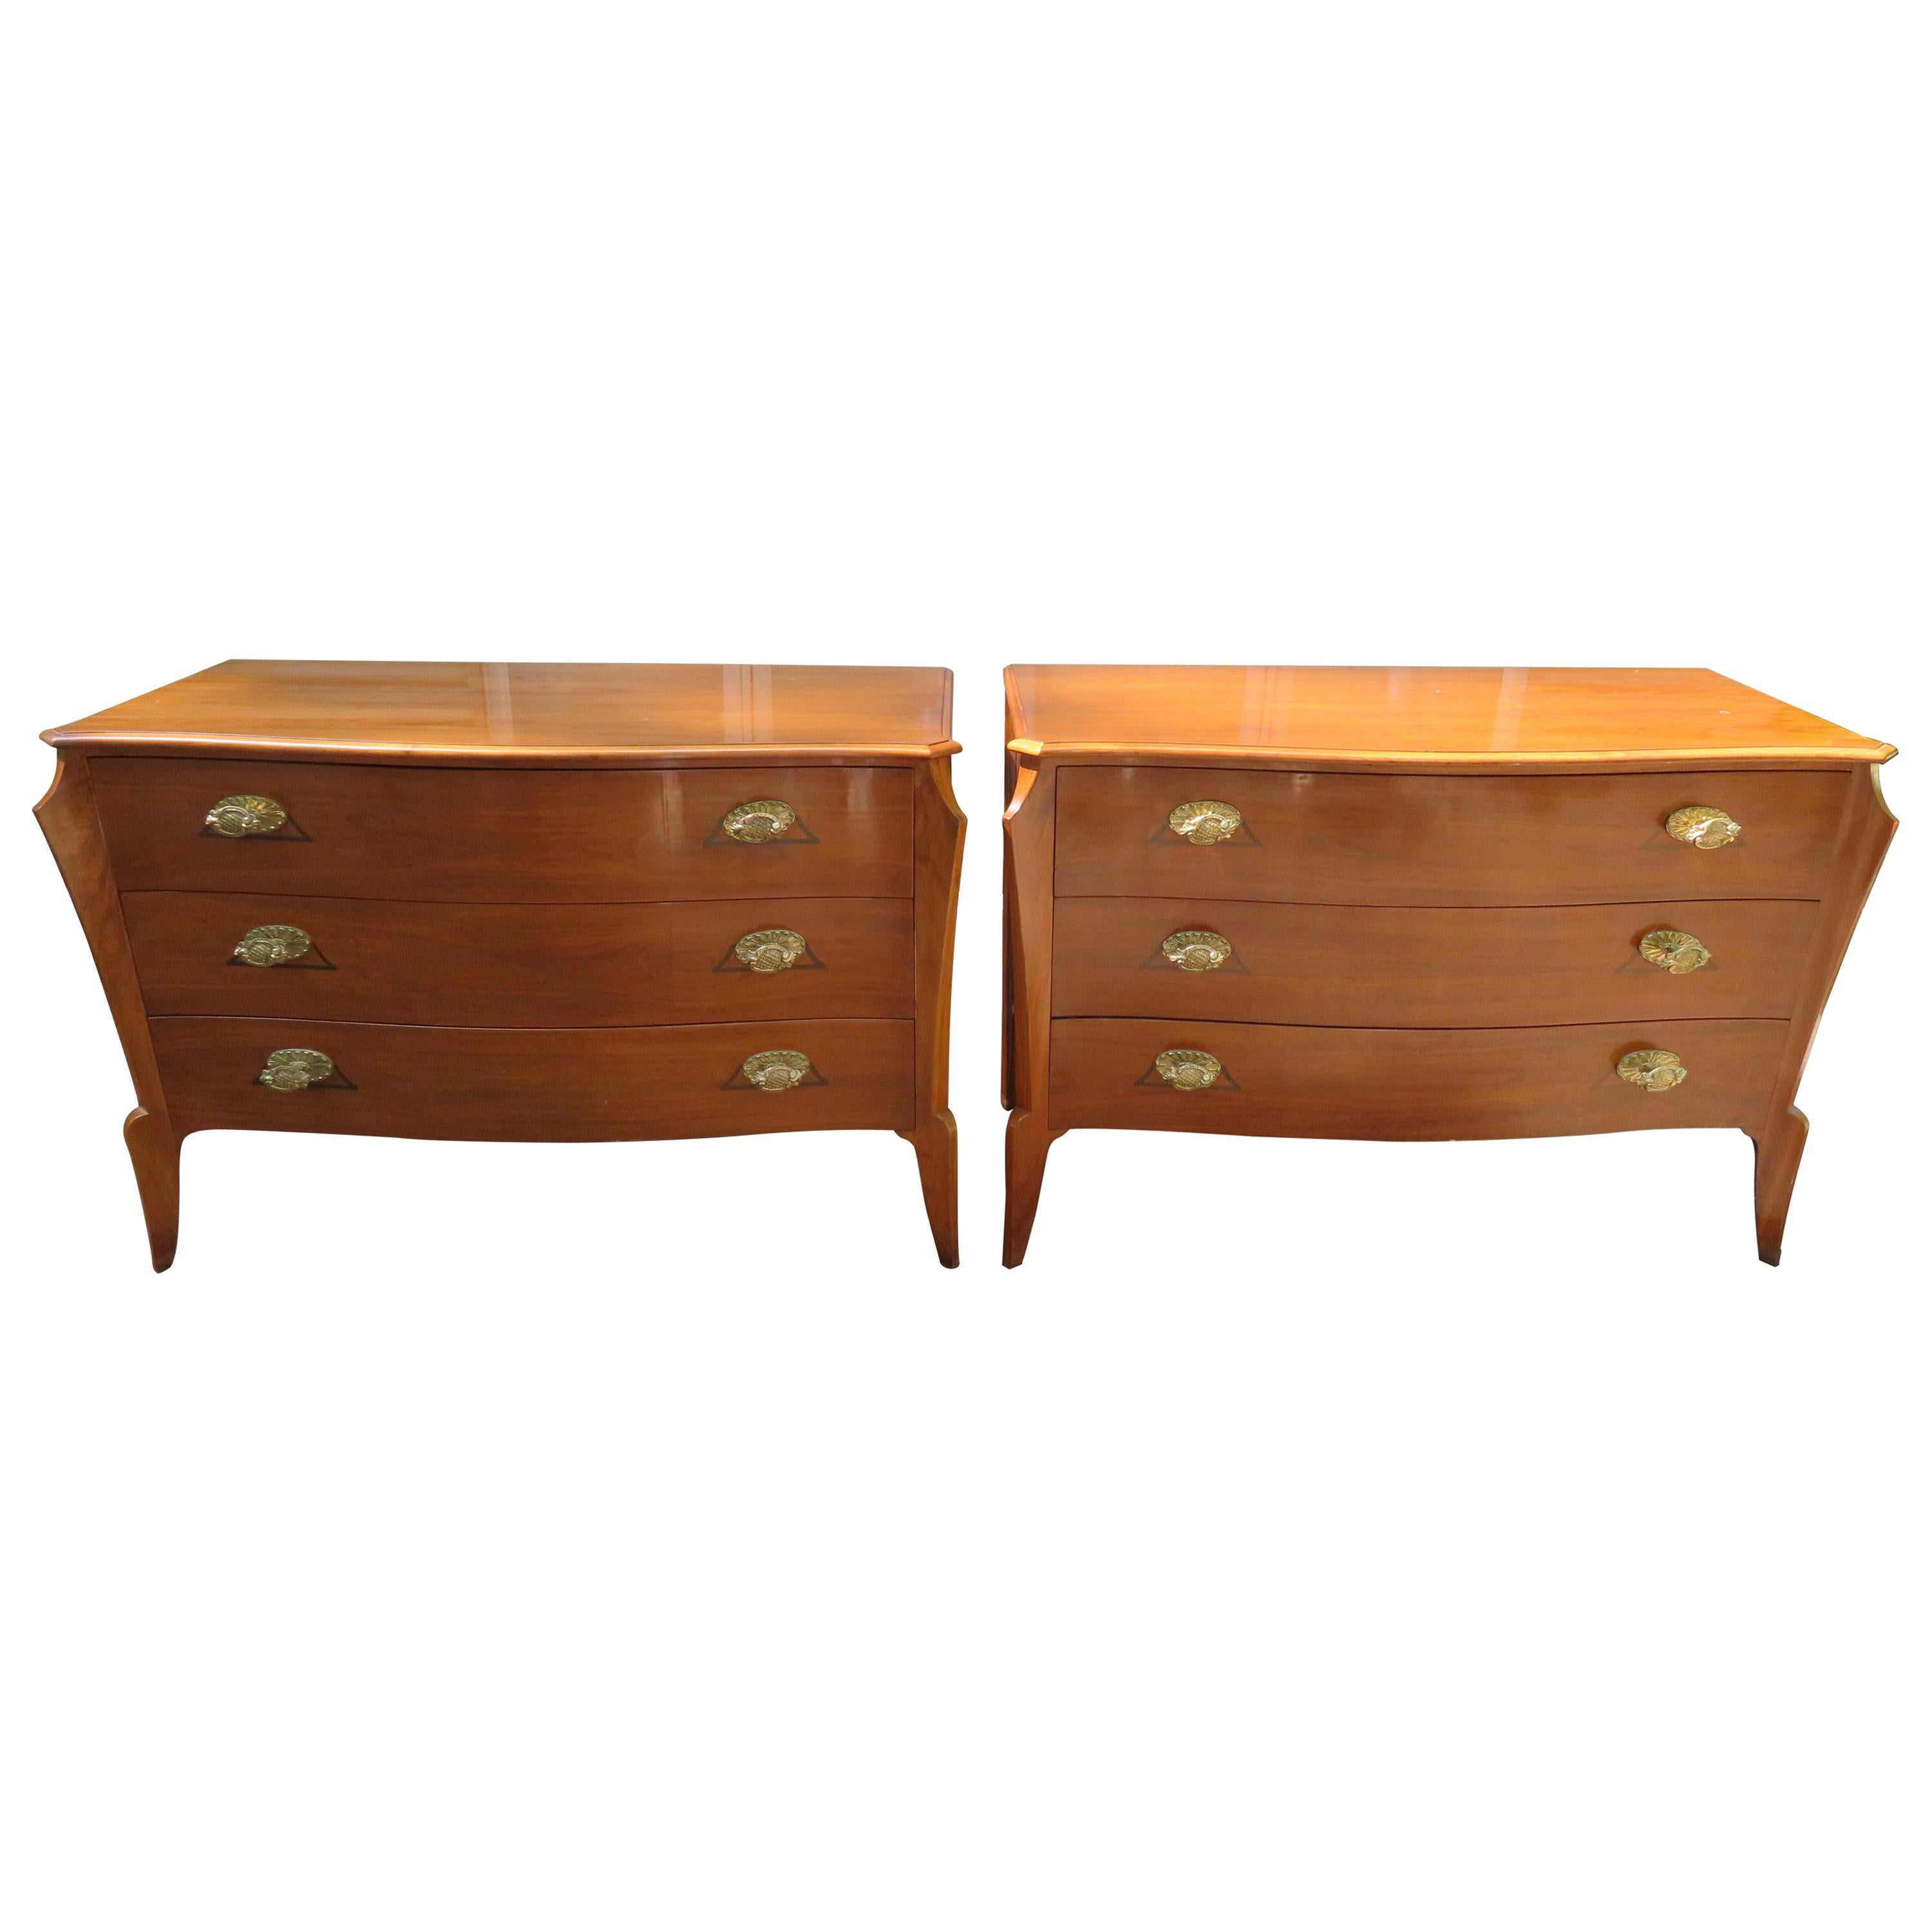 Magnificent Pair of Dorothy Draper Style Bowed Front Bachelors Chests Regency For Sale